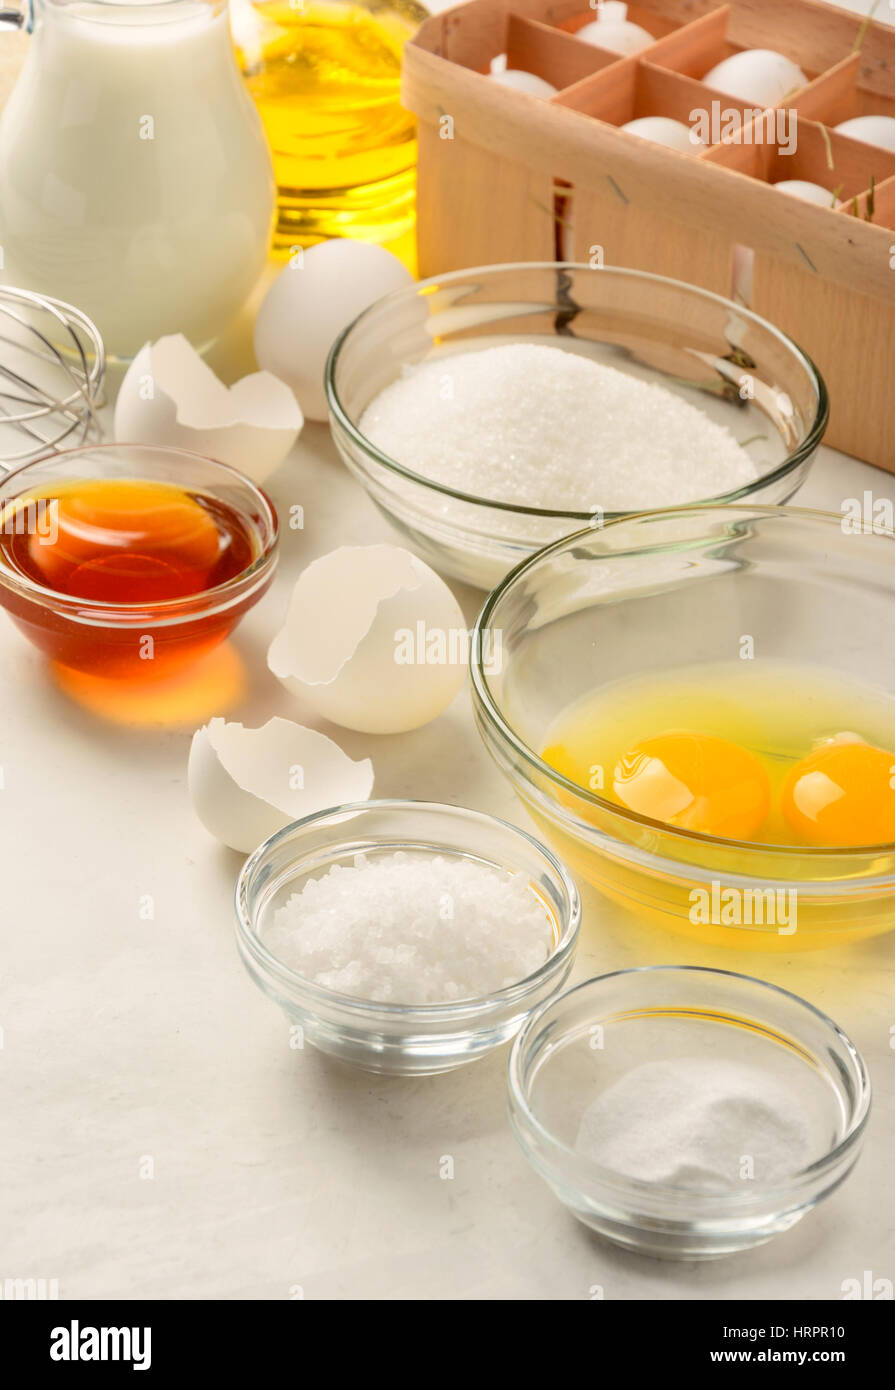 Ingredients for making pancakes on a white background Stock Photo